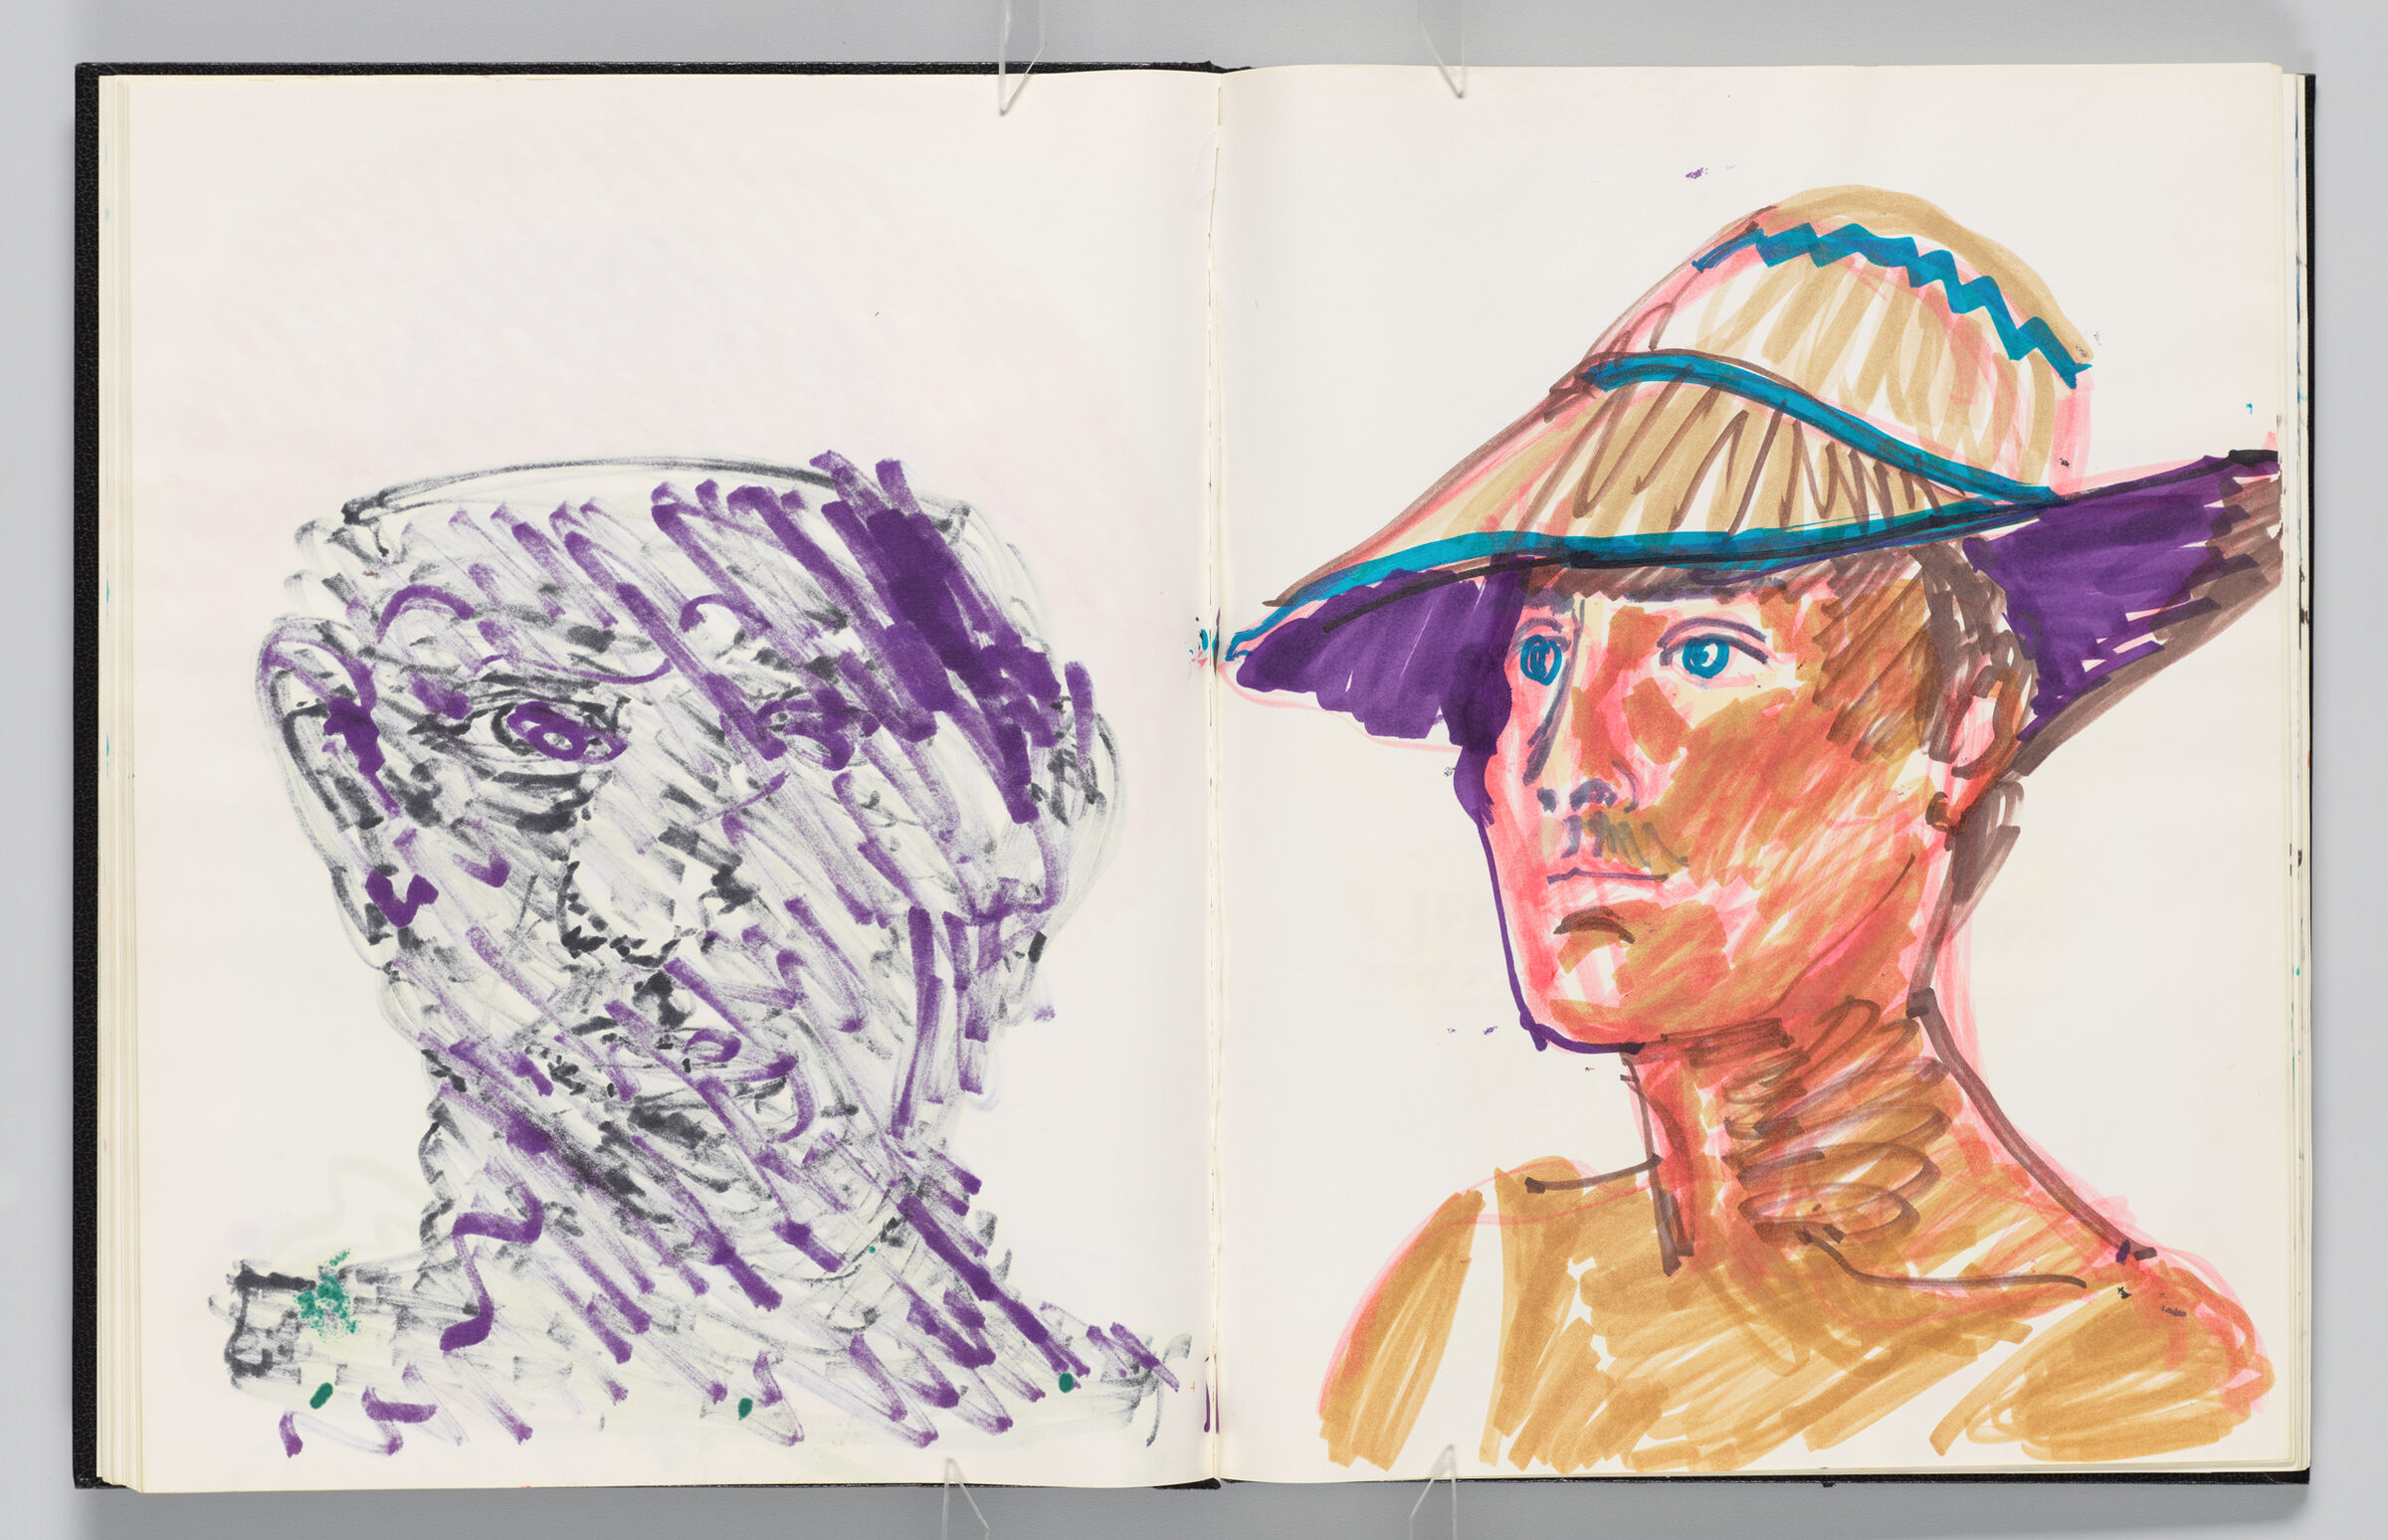 Untitled (Bleed-Through Of Previous Page, Left Page); Untitled (Portrait Of Figure In Hat, Right Page)